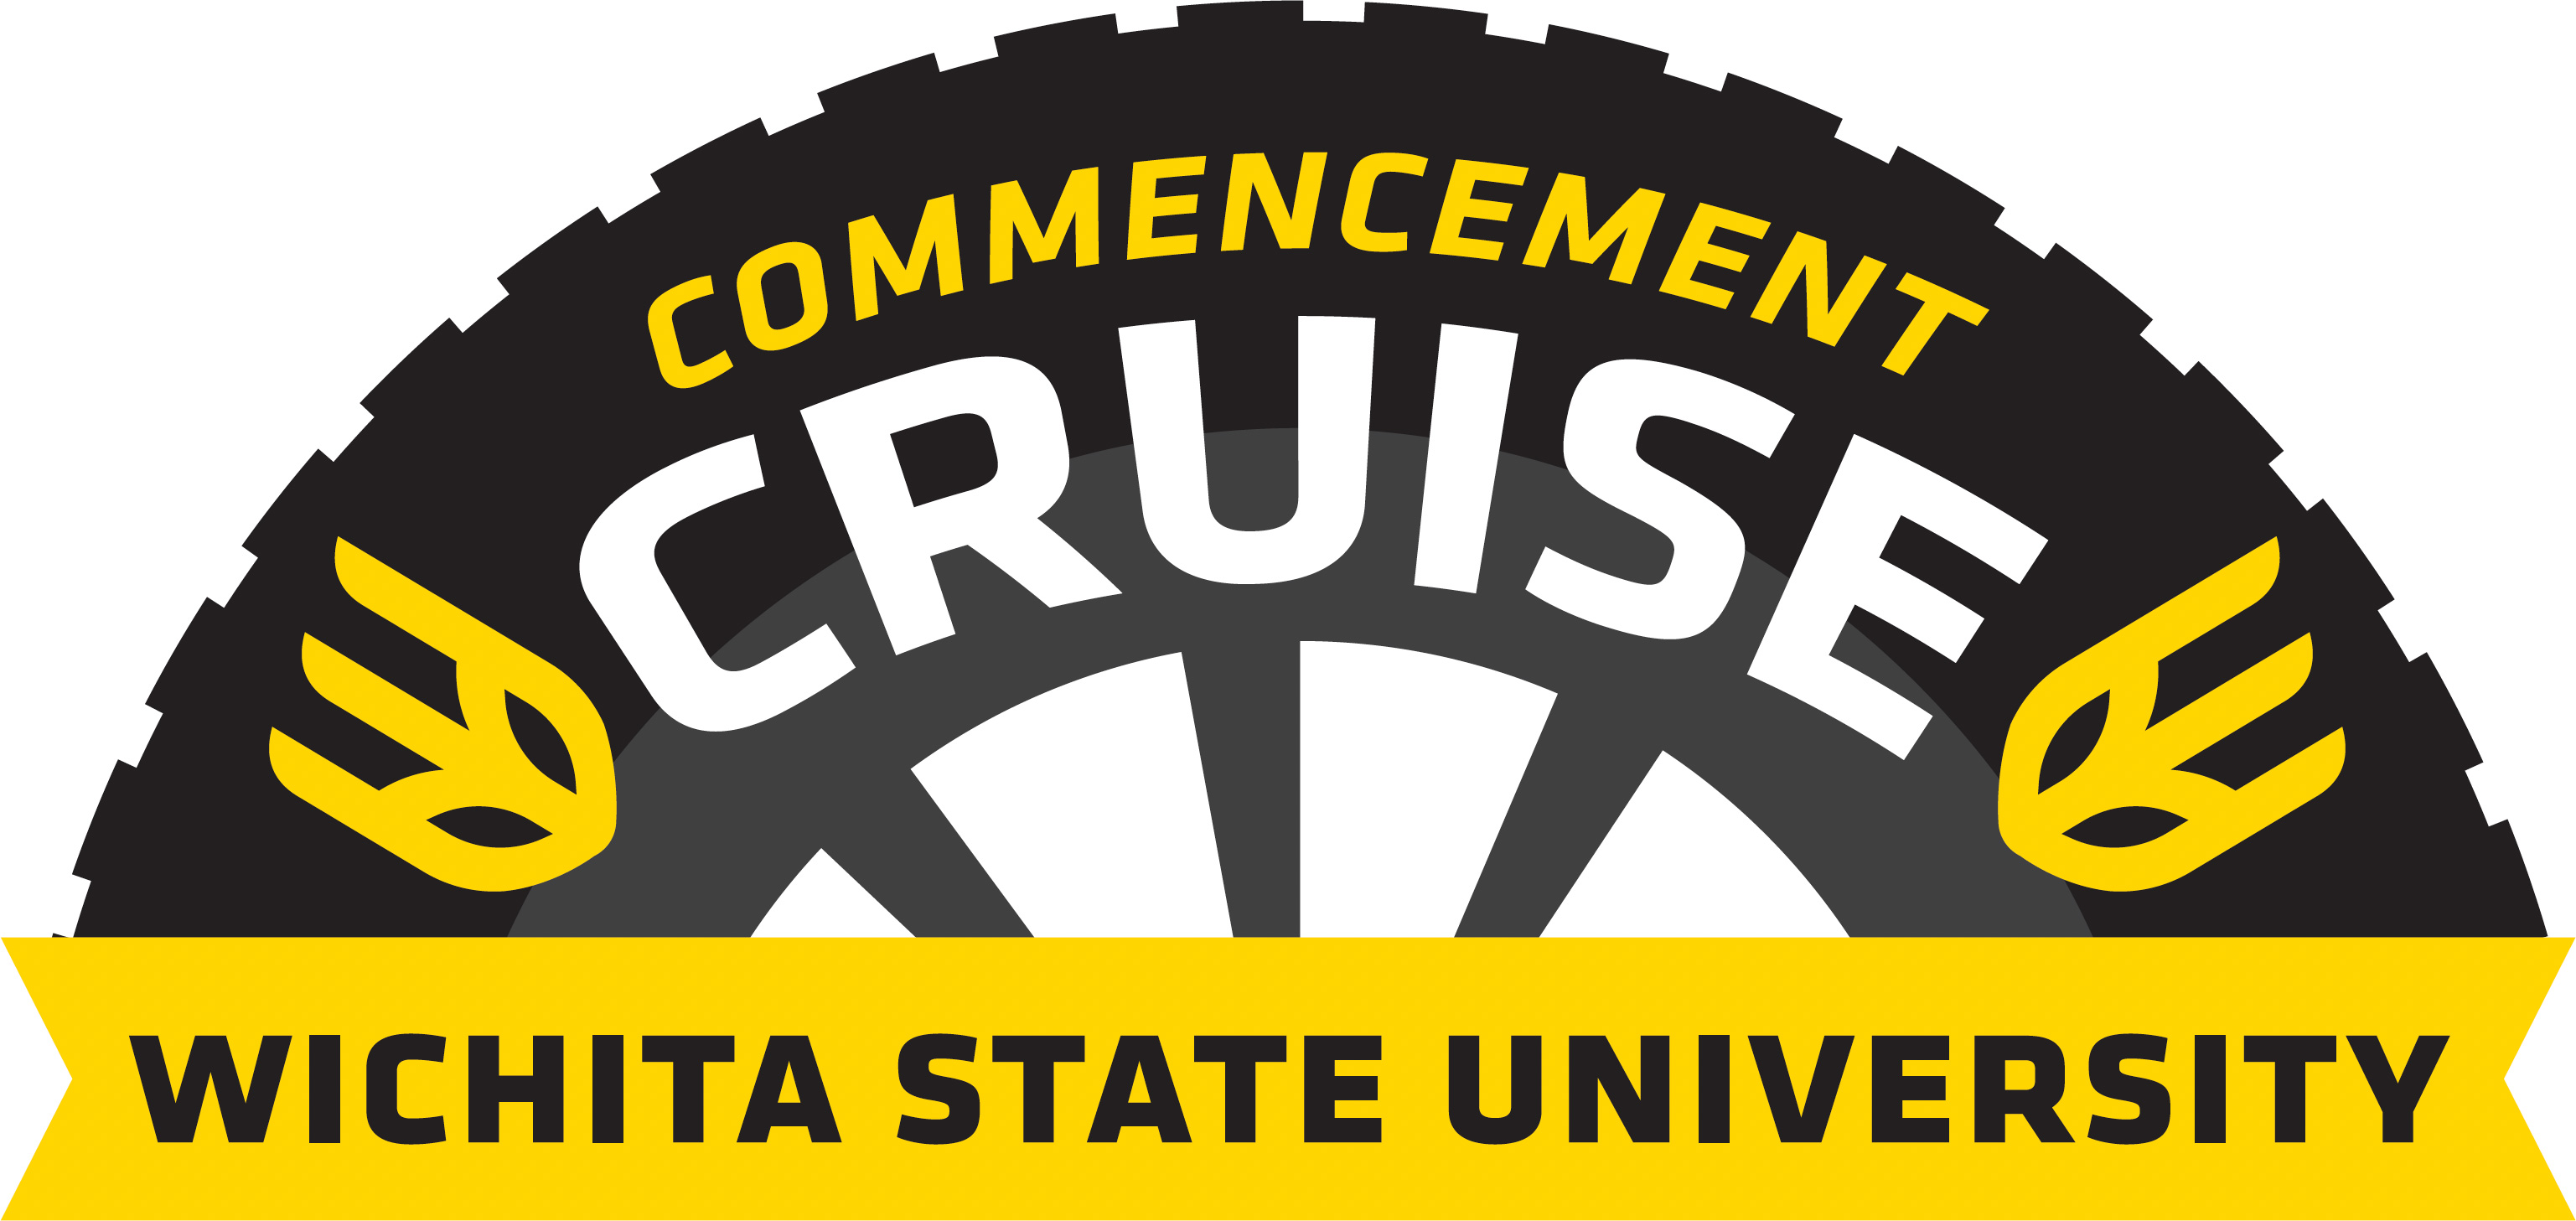 Commencement Cruise Logo